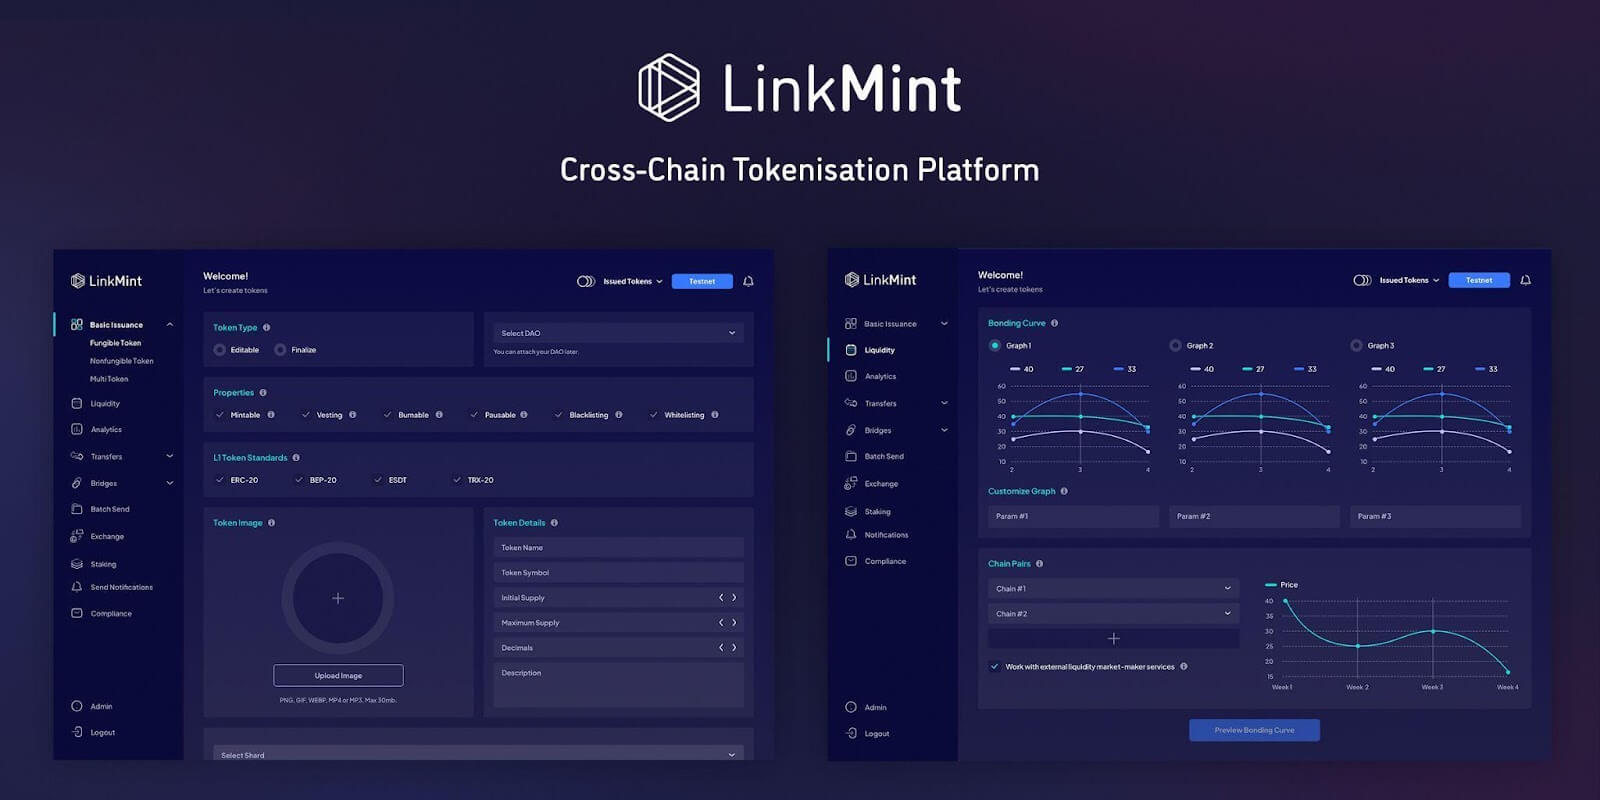 Coinweb to bring cross-chain tokenisation to Layer 2